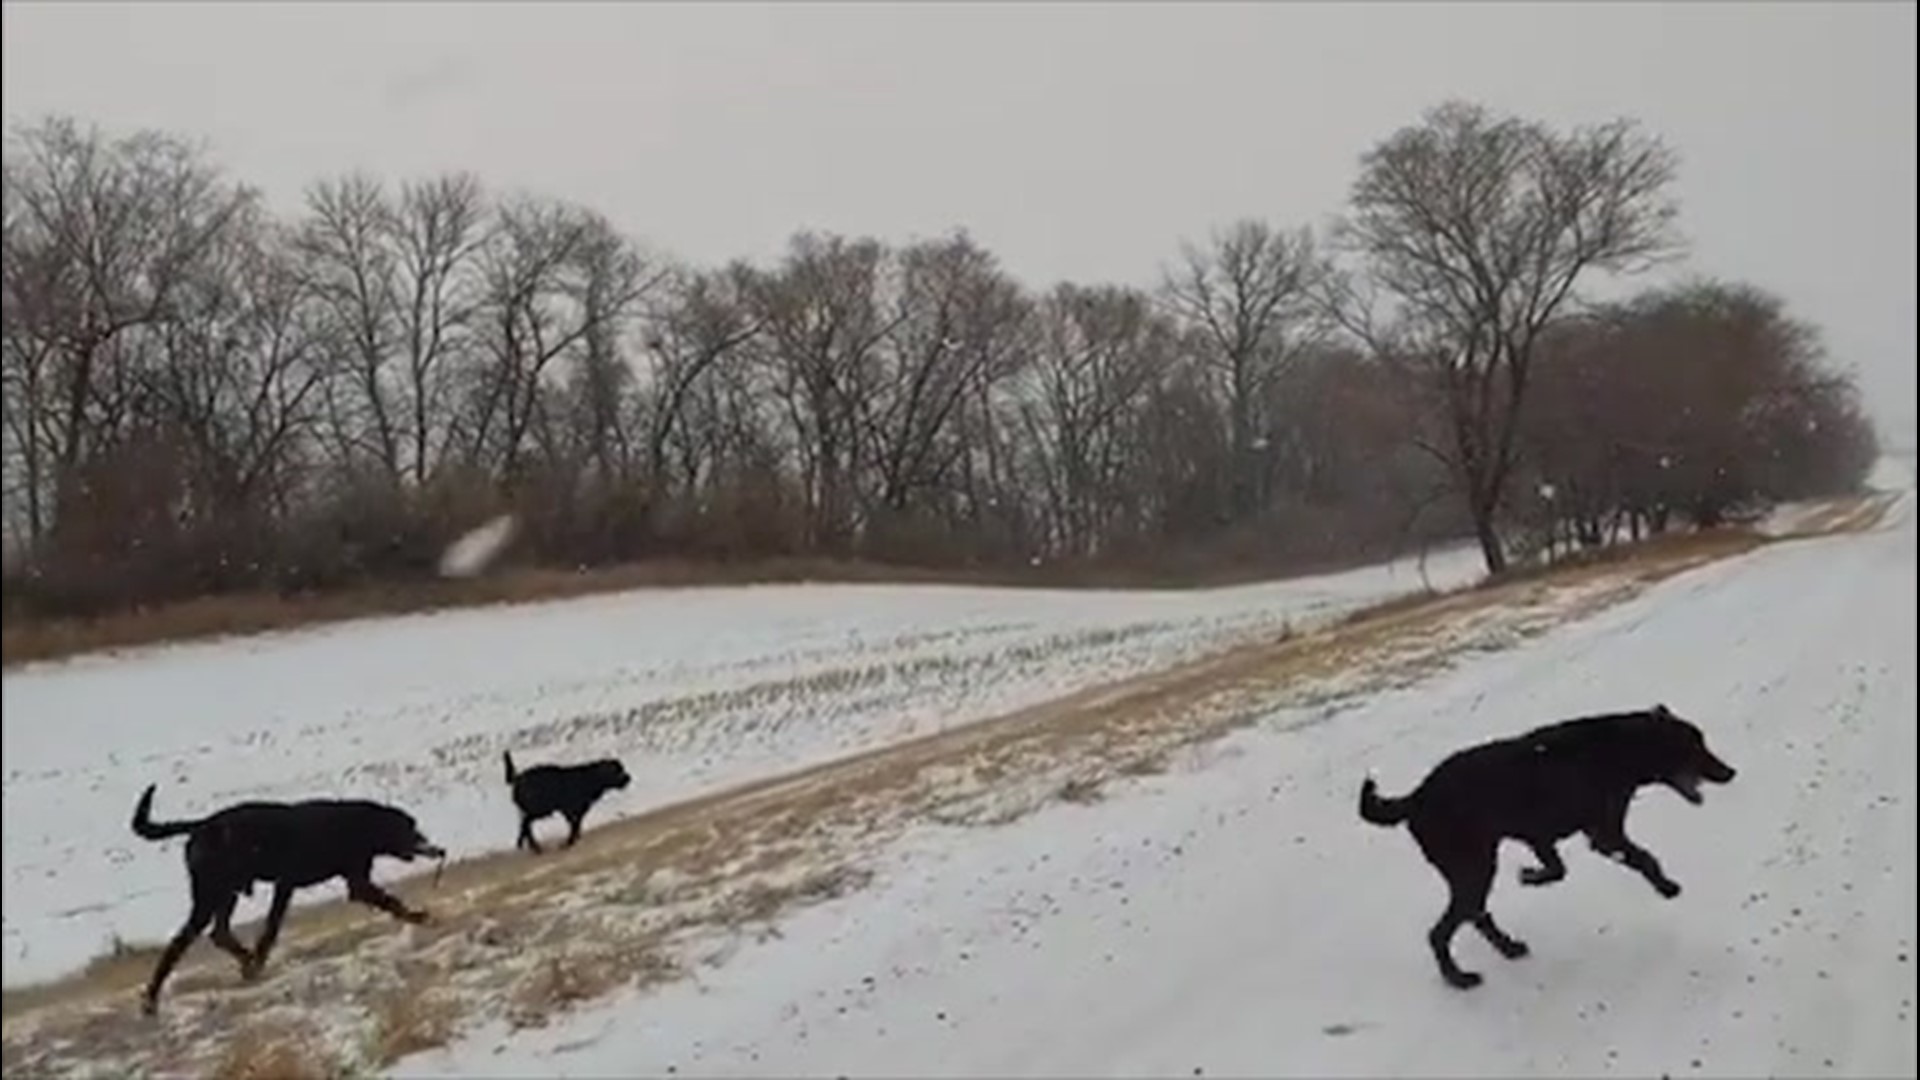 A whole group of dogs could be seen on Jan. 18 dashing along a snow-covered road in southeastern North Dakota.